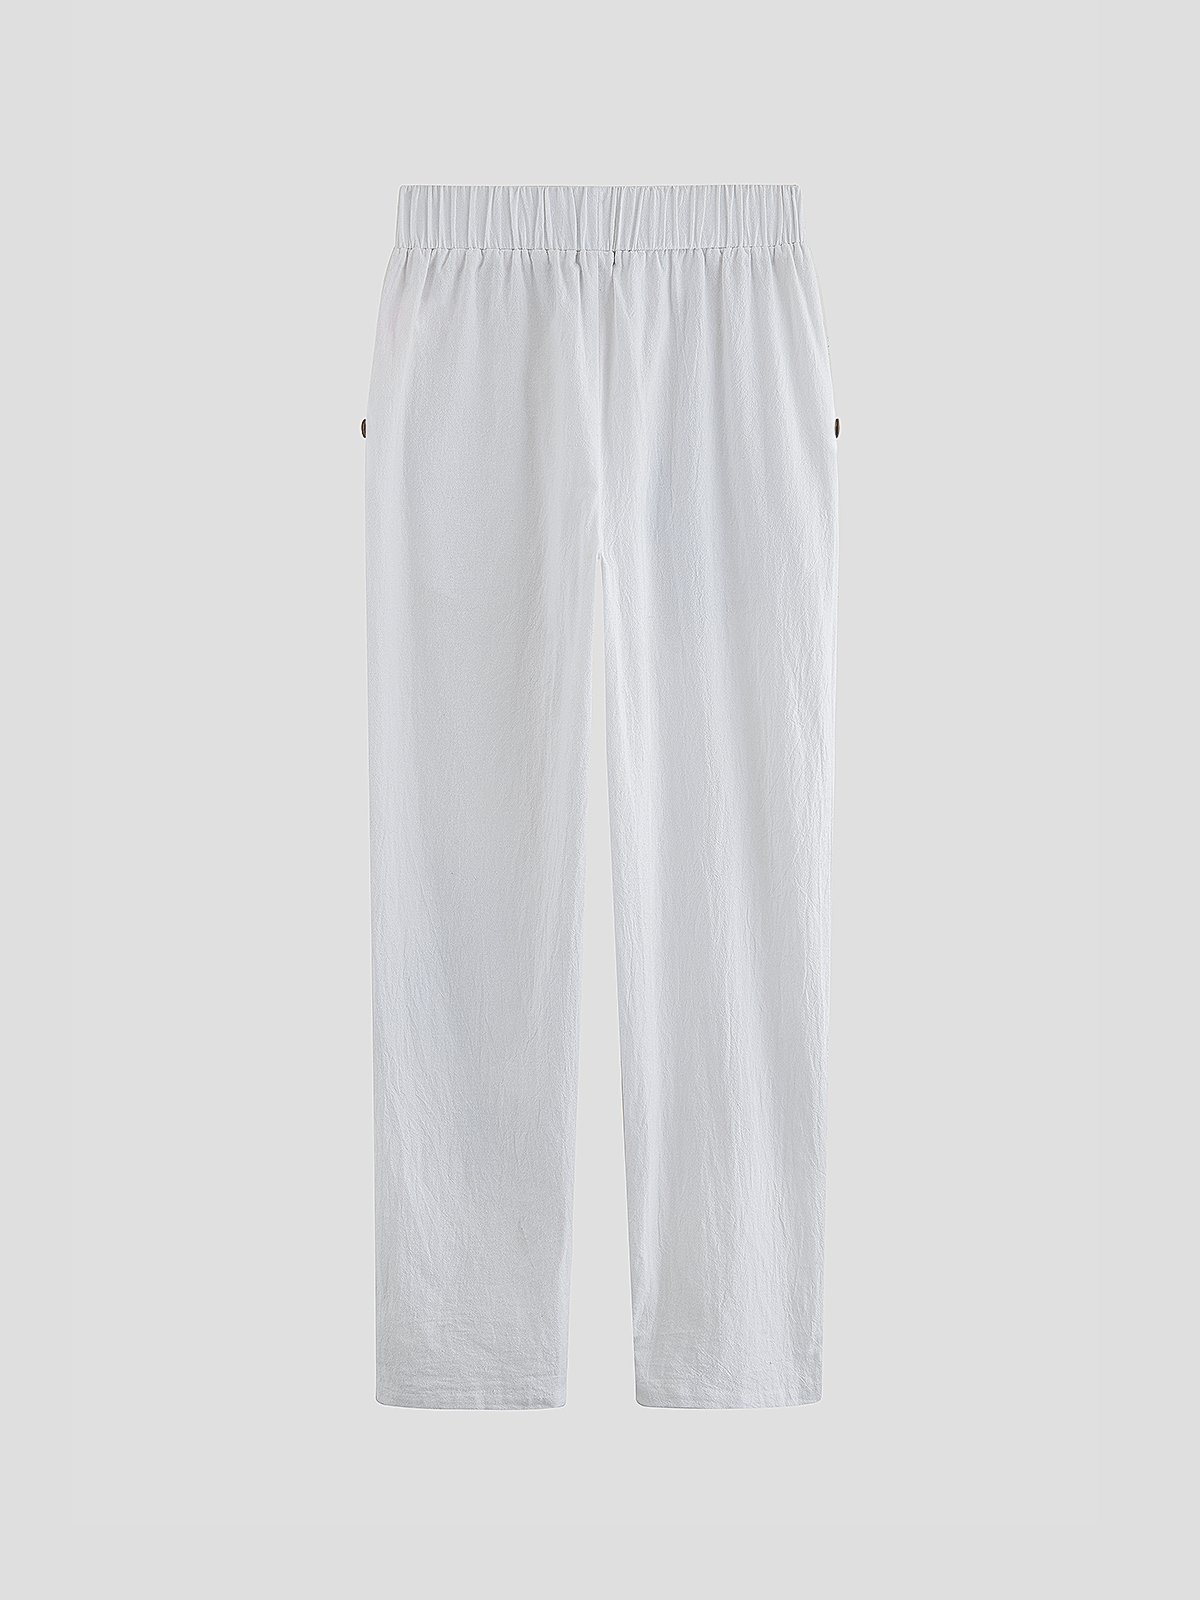 JFN Cotton & Linen Loose Casual Baggy & Daisy Floral Pant